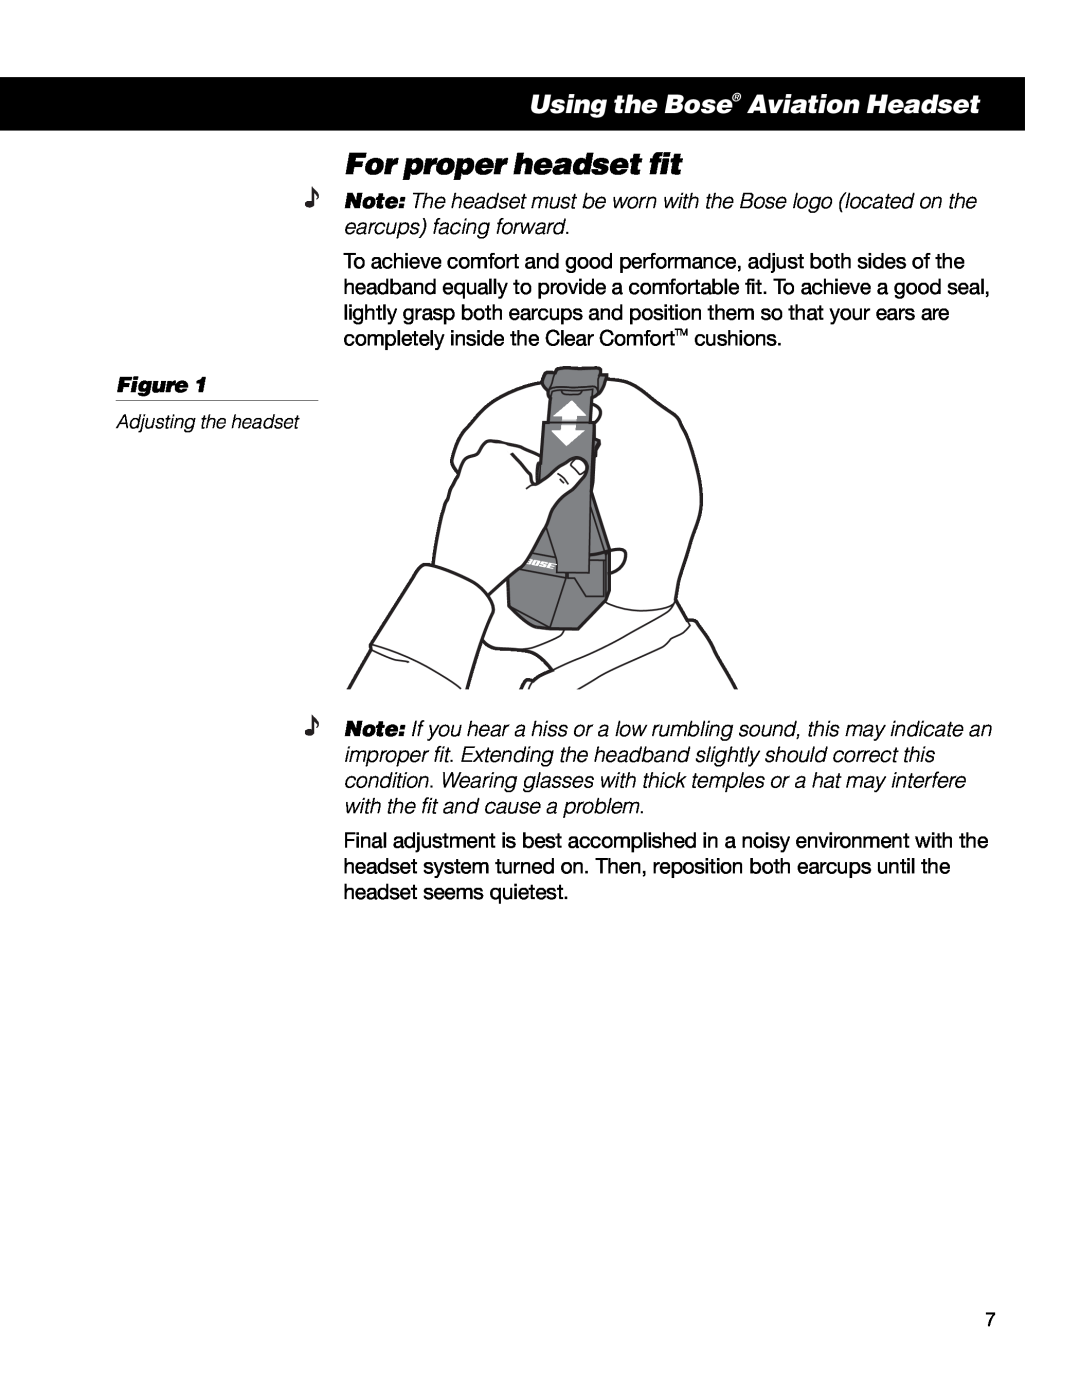 Bose II manual For proper headset fit, Using the Bose Aviation Headset 